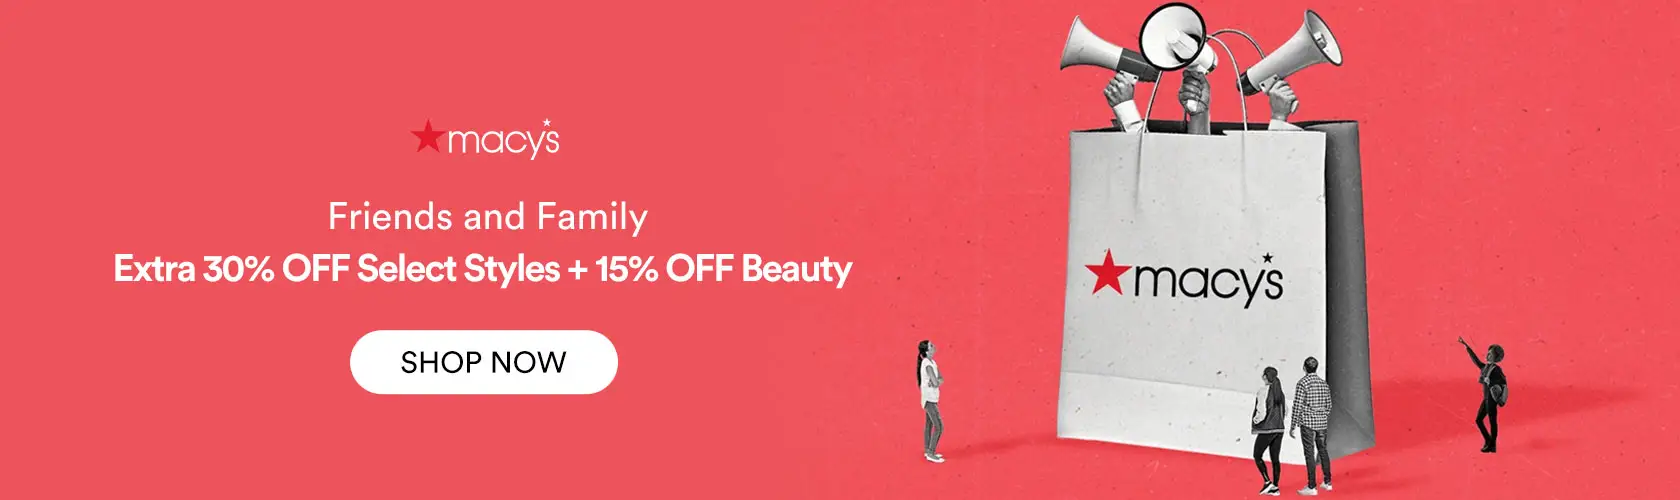 Macys: Extra 30% OFF Select Styles + 15% OFF Beauty